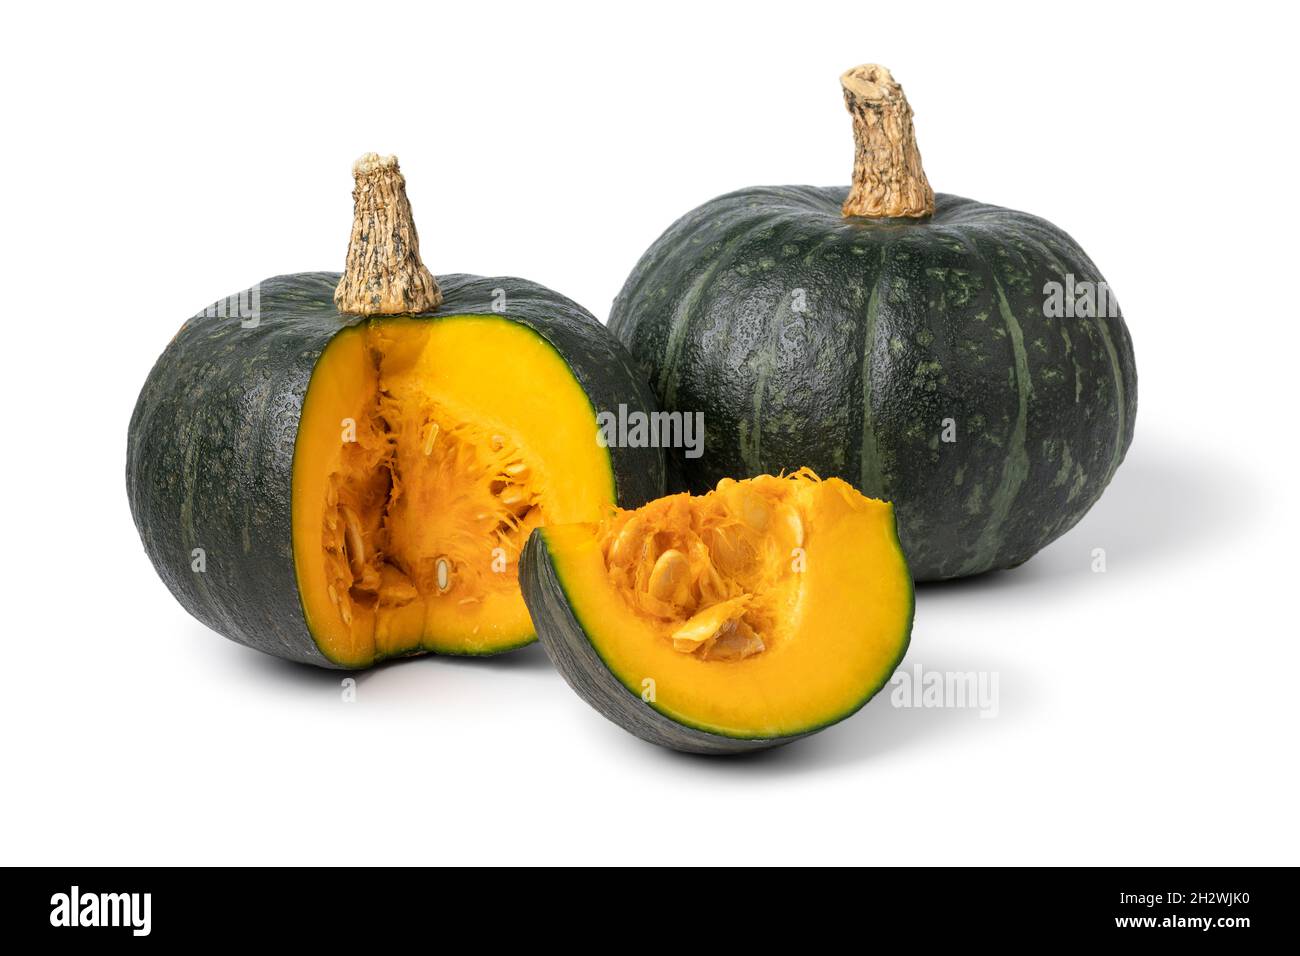 Fresh green whole Kabocha pumpkin and a cut close up isolated on white background Stock Photo